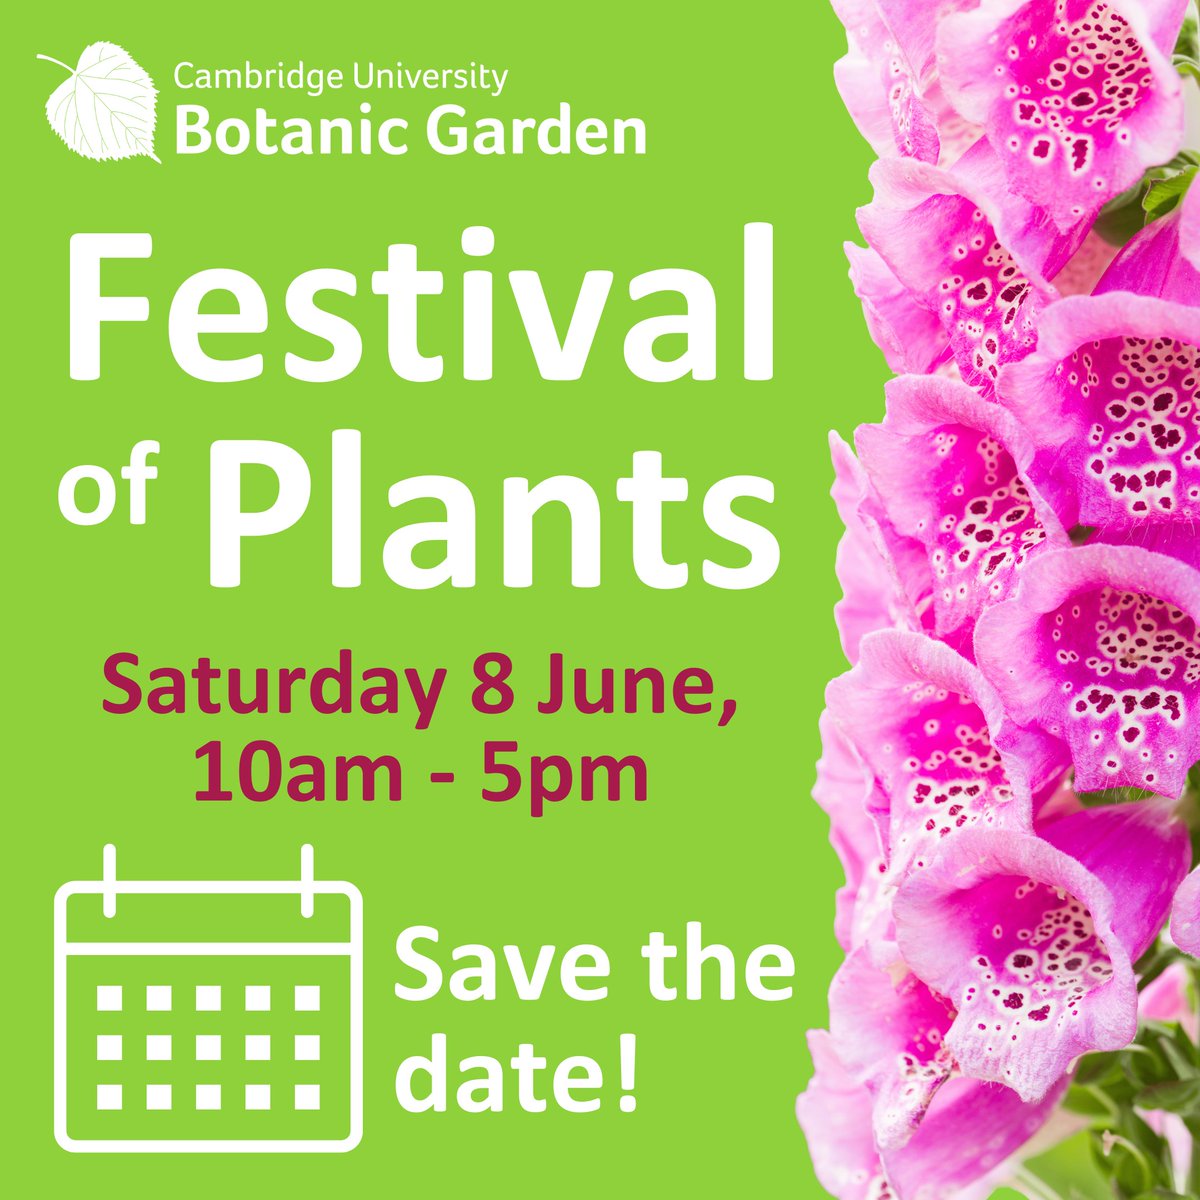 🌱It’s a month until our annual Festival of Plants! 🌷The festival celebrates the wonder of plants with the Garden in full bloom. Save the date & look out for exciting updates! 🌲Normal Garden admission applies, pay on the day or pre-book online. 🍄Kindly supported by @slcuplants